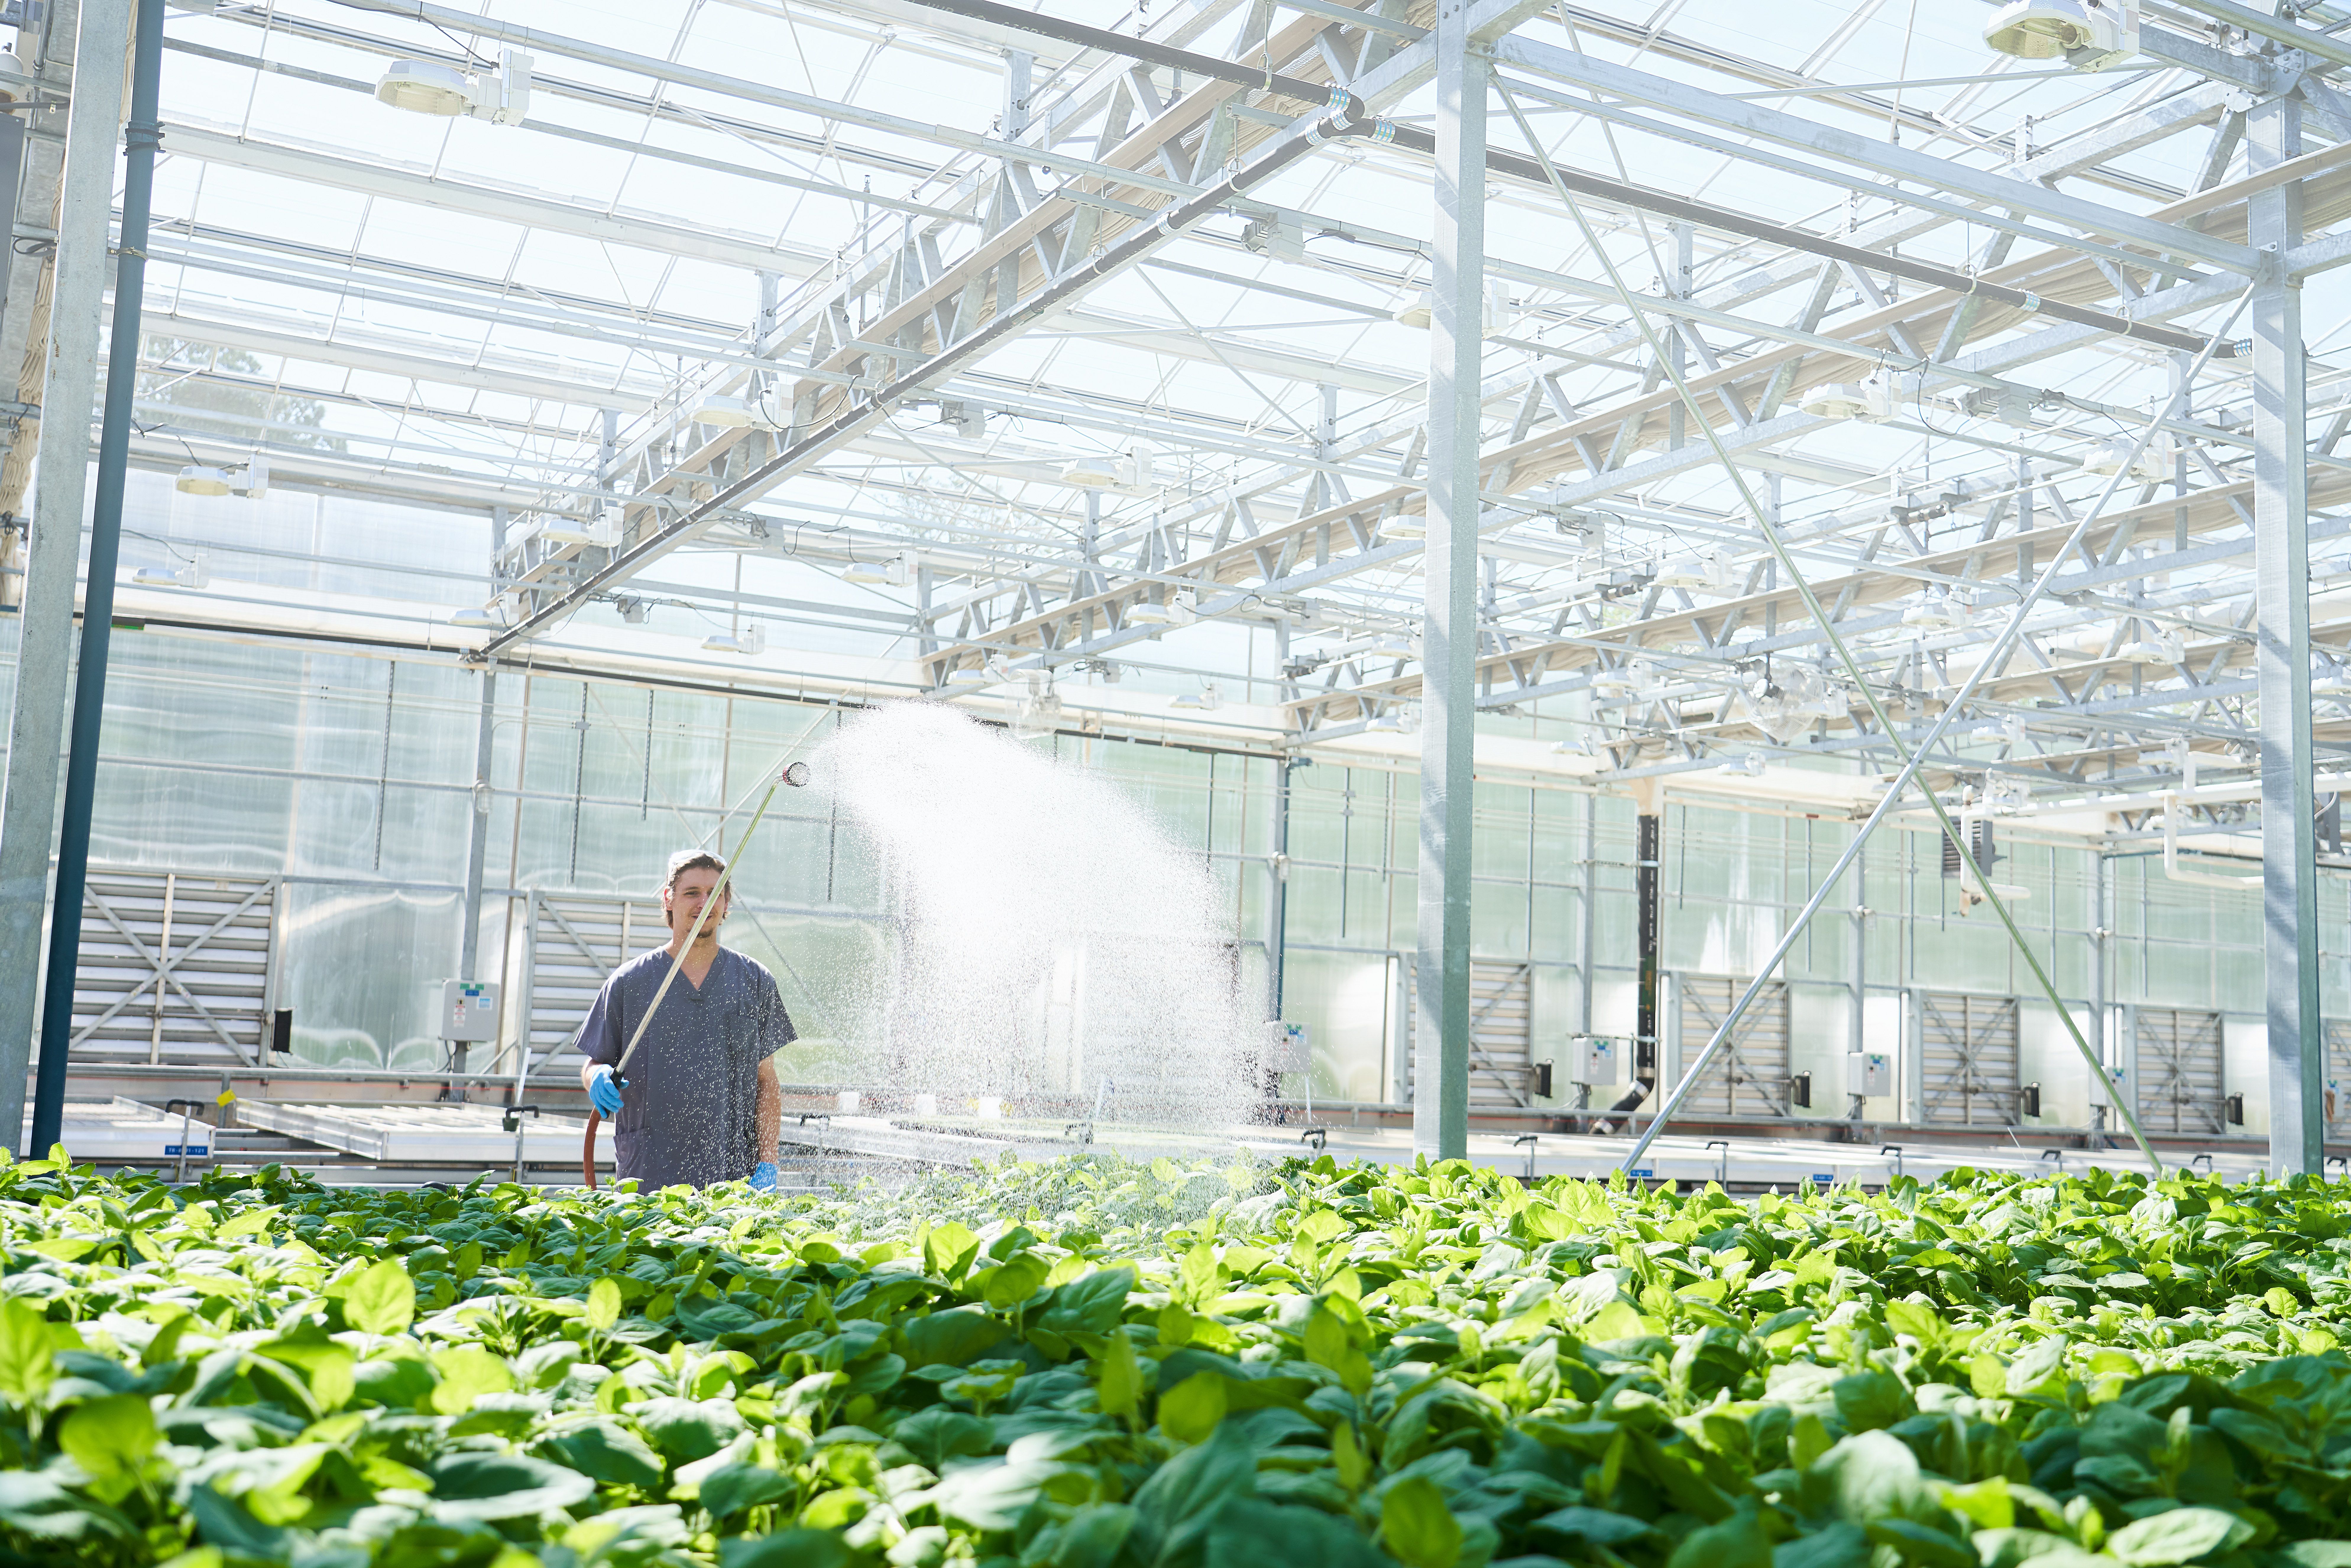 Shown is a colour photograph of a person spraying rows of green plants in a sun-filled building.